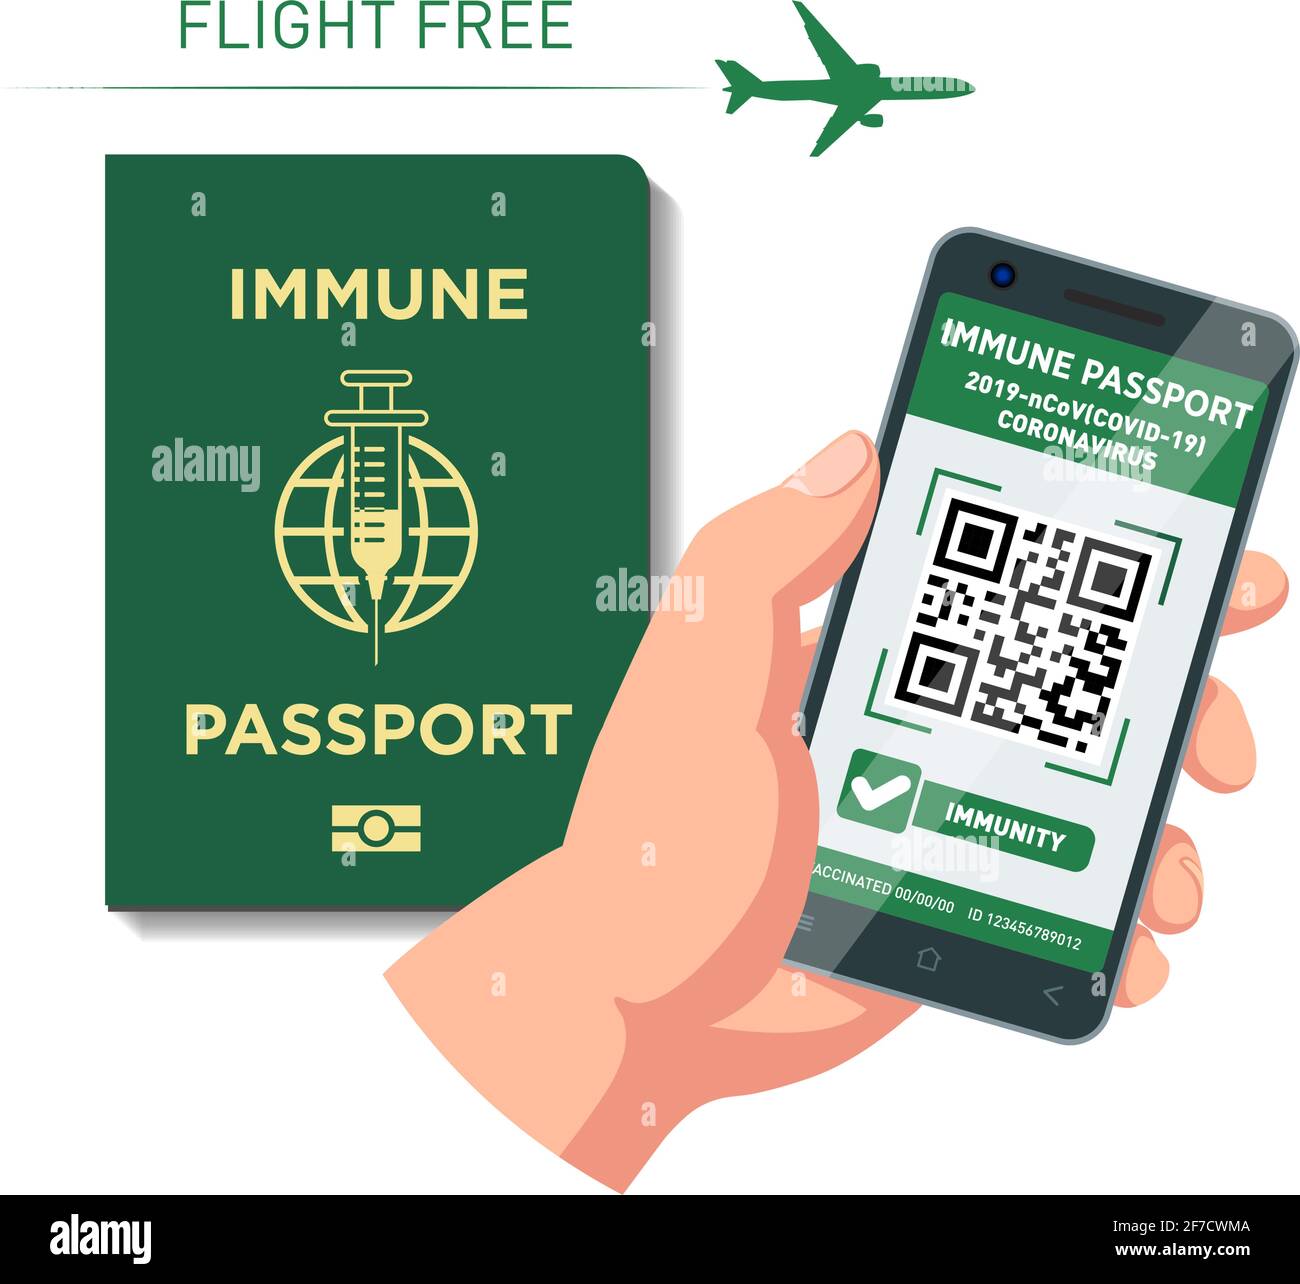 Digital and paper Vaccination immune passport for flight. Safety travel after the Covid-19 pandemic. Vector on transparent background Stock Vector